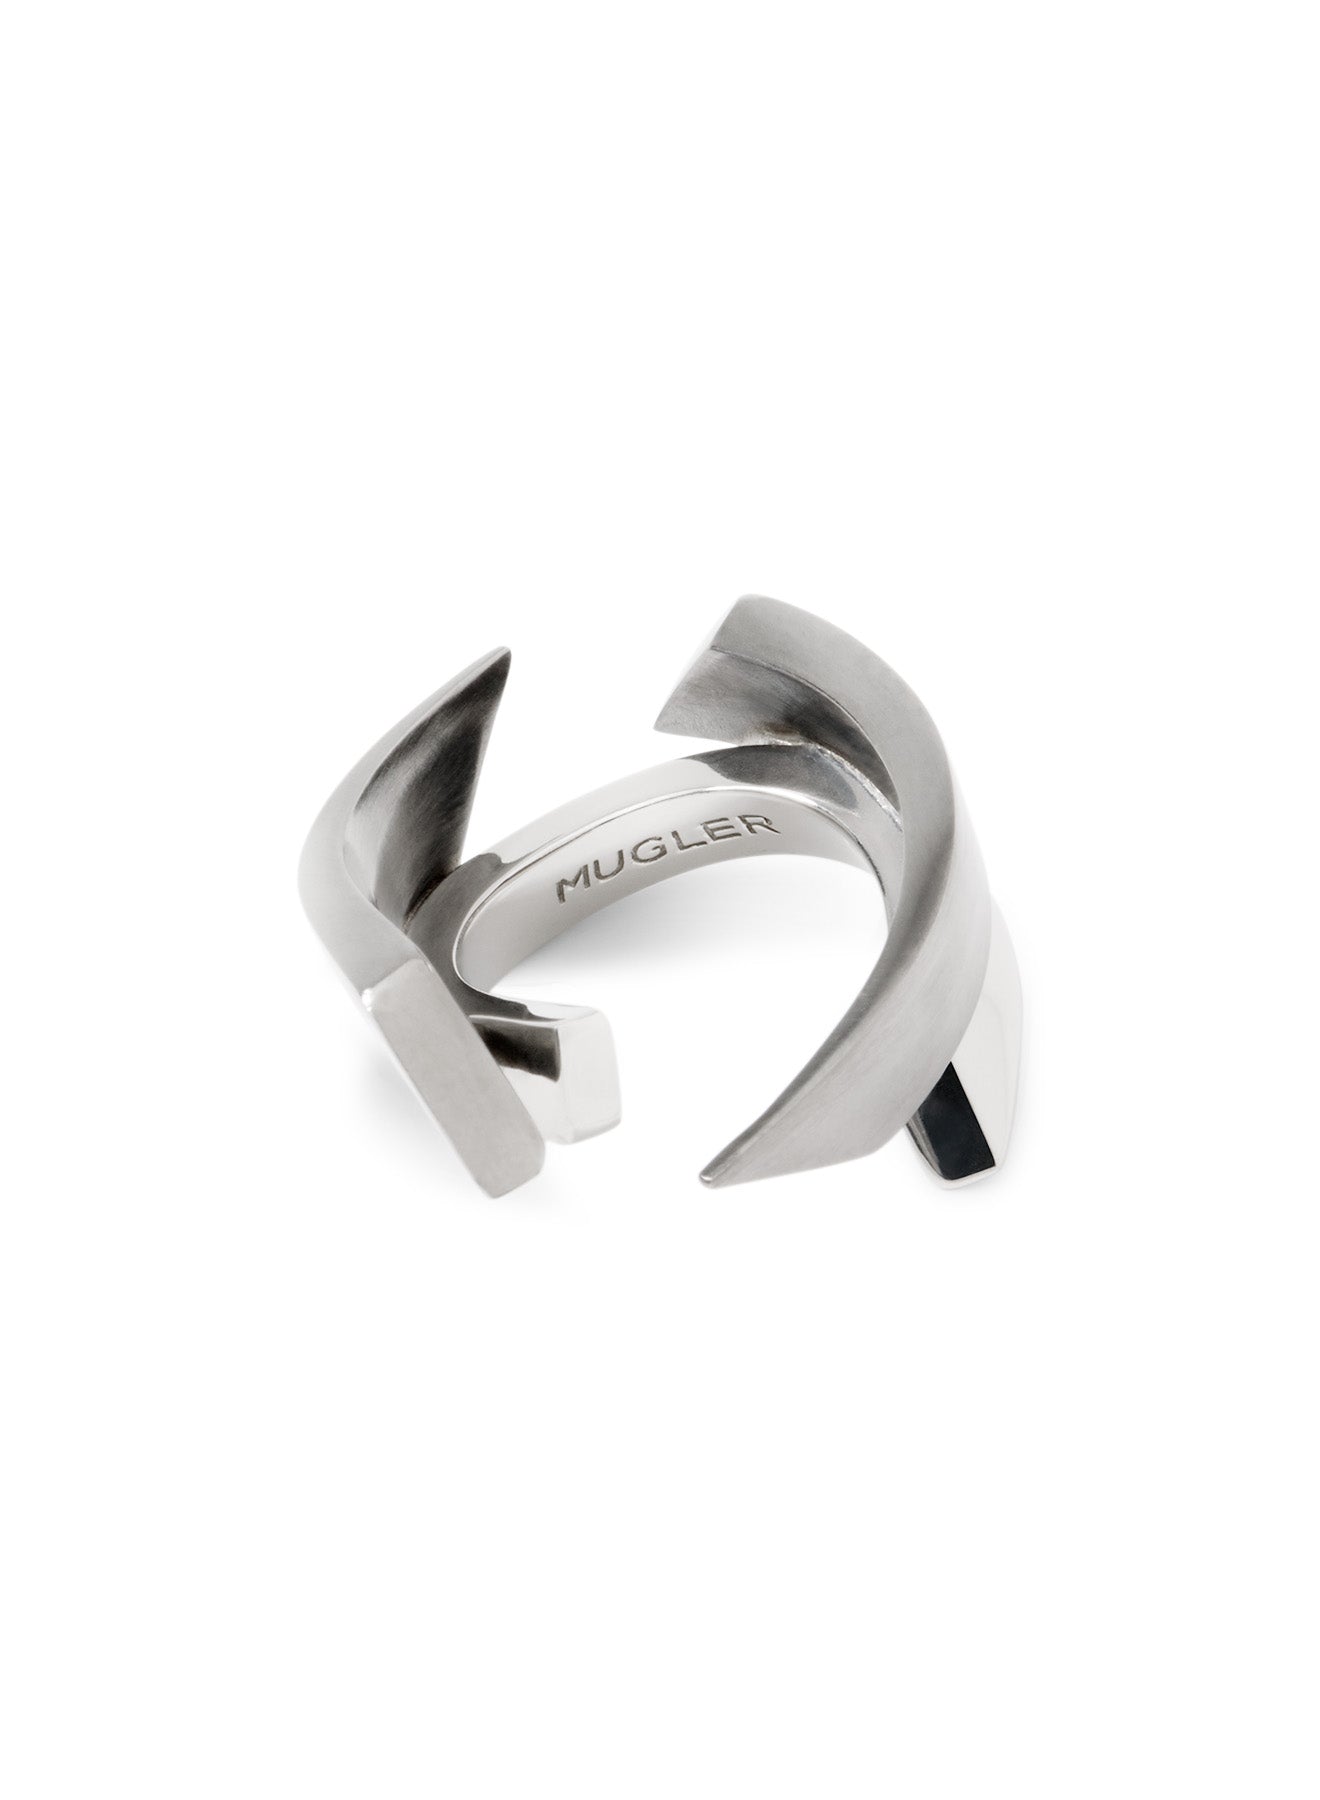 silver spike ring